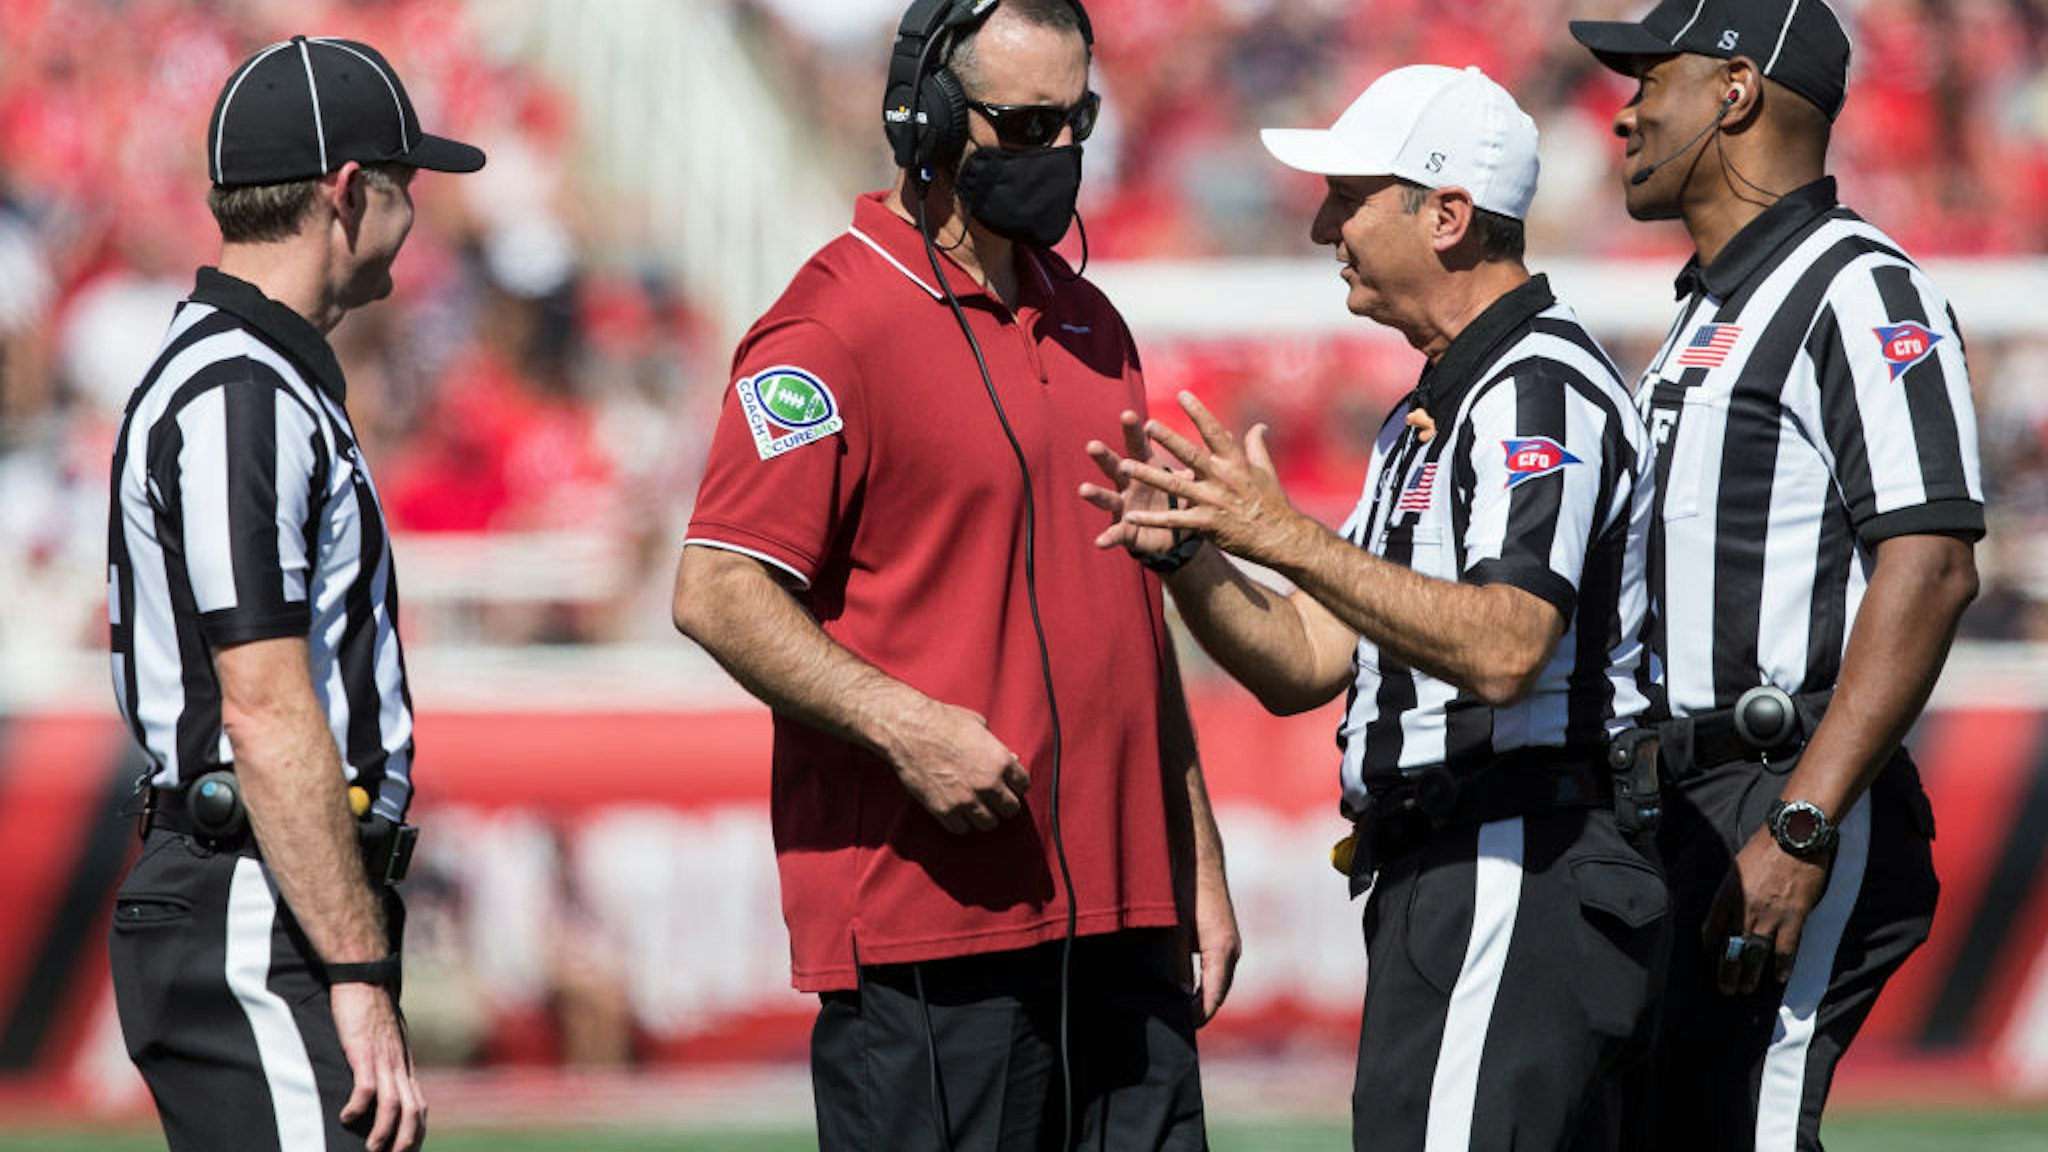 SALT LAKE CITY, UT - SEPTEMBER 25 : Nick Rolovich head coach of the Washington State Cougars talks with officials during their game against the Utah Utes September 25, 2021 at Rice Eccles Stadium in Salt Lake City, Utah. (Photo by Chris Gardner/Getty Images)